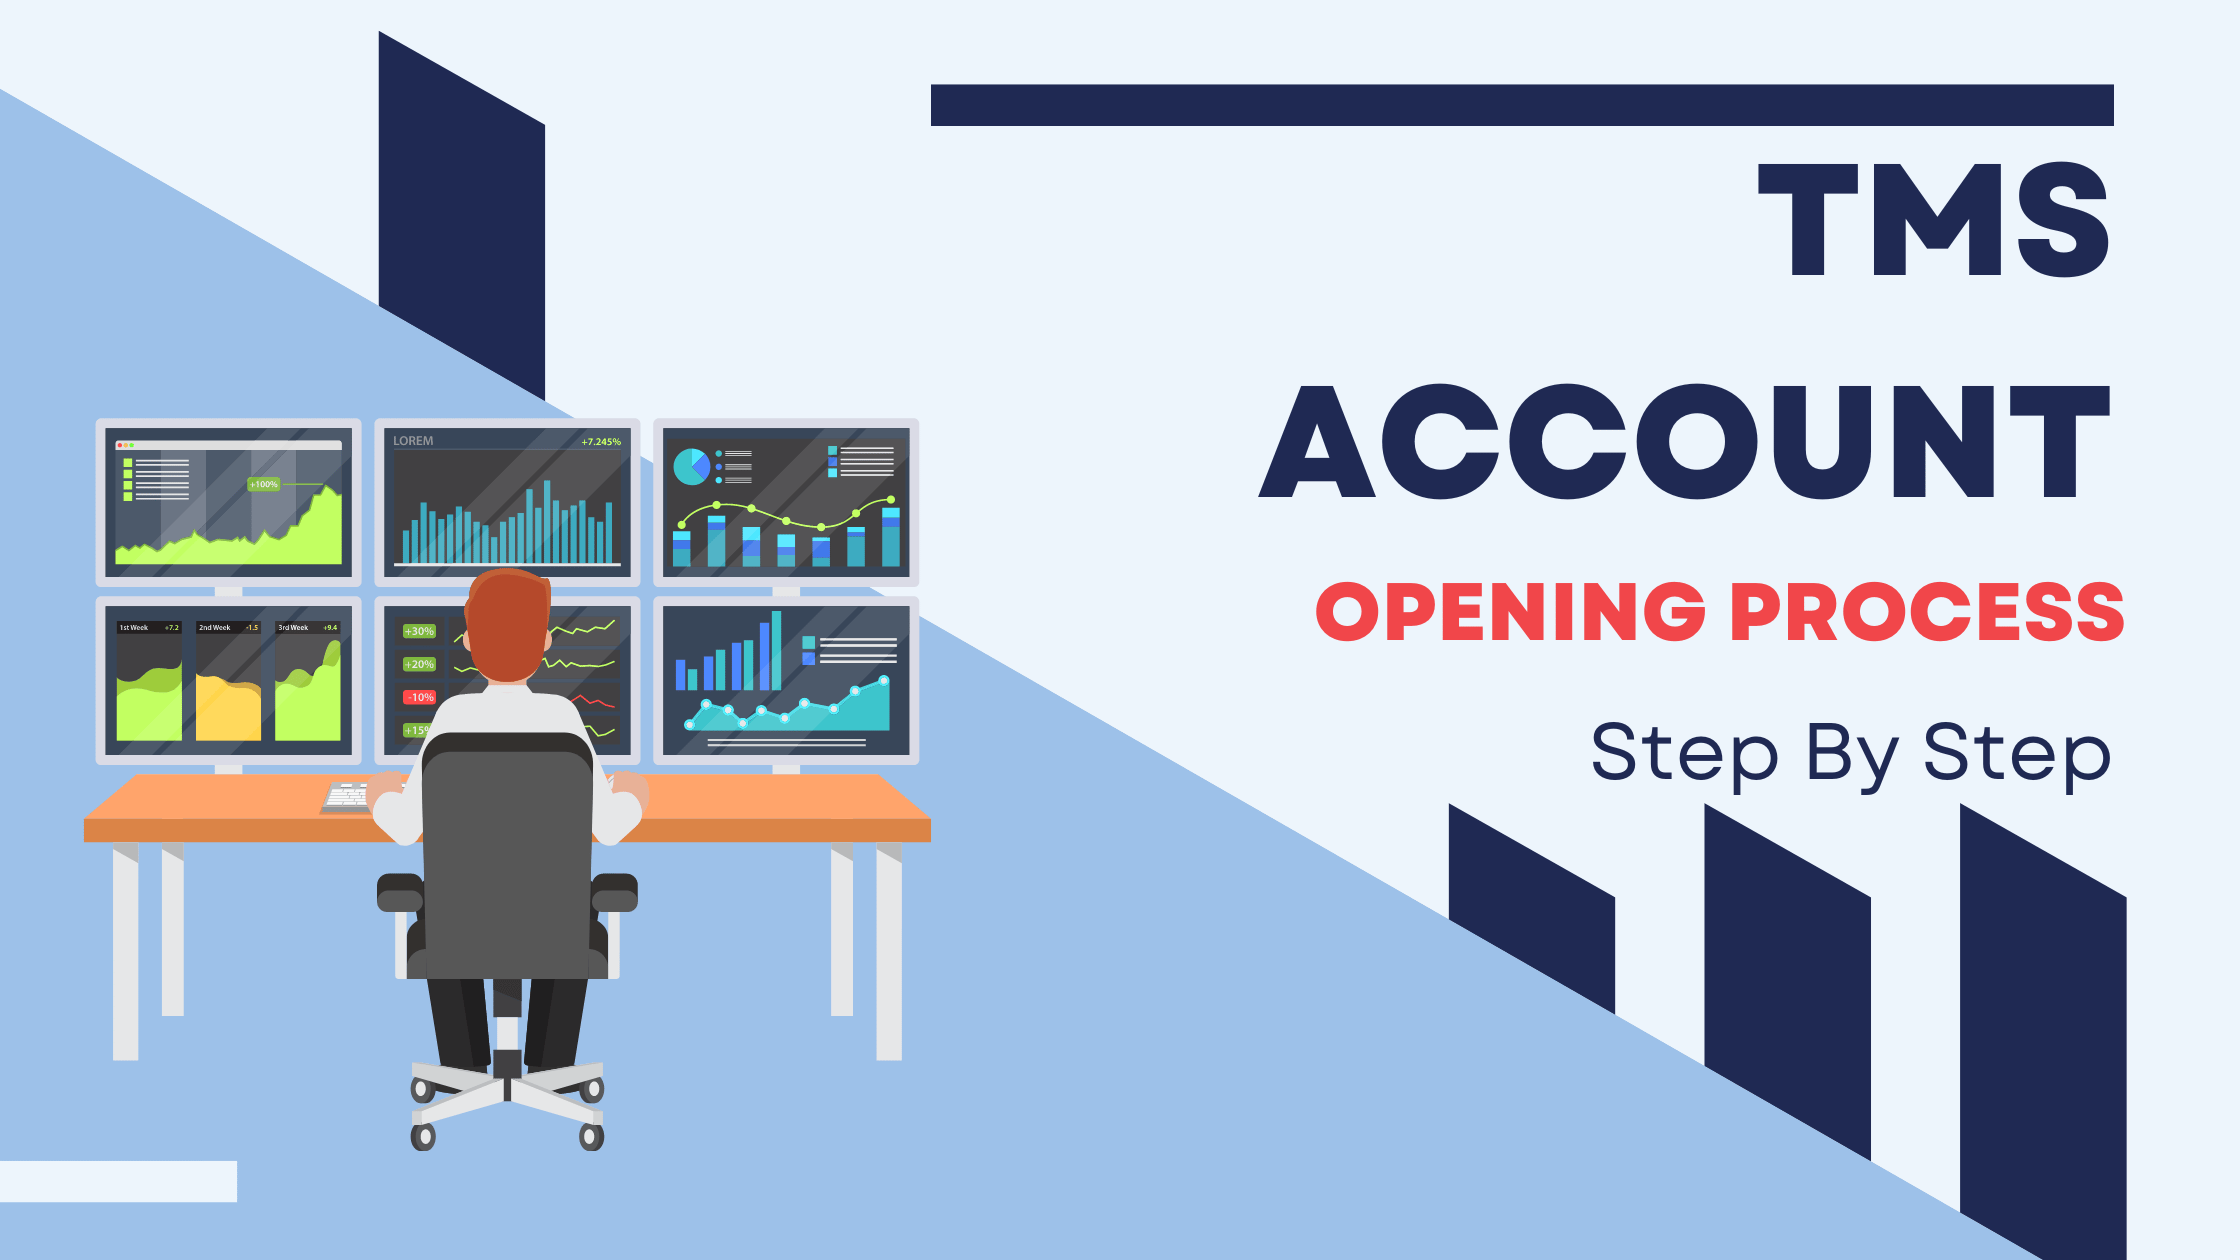 TMS Account Opening Process Step by Step